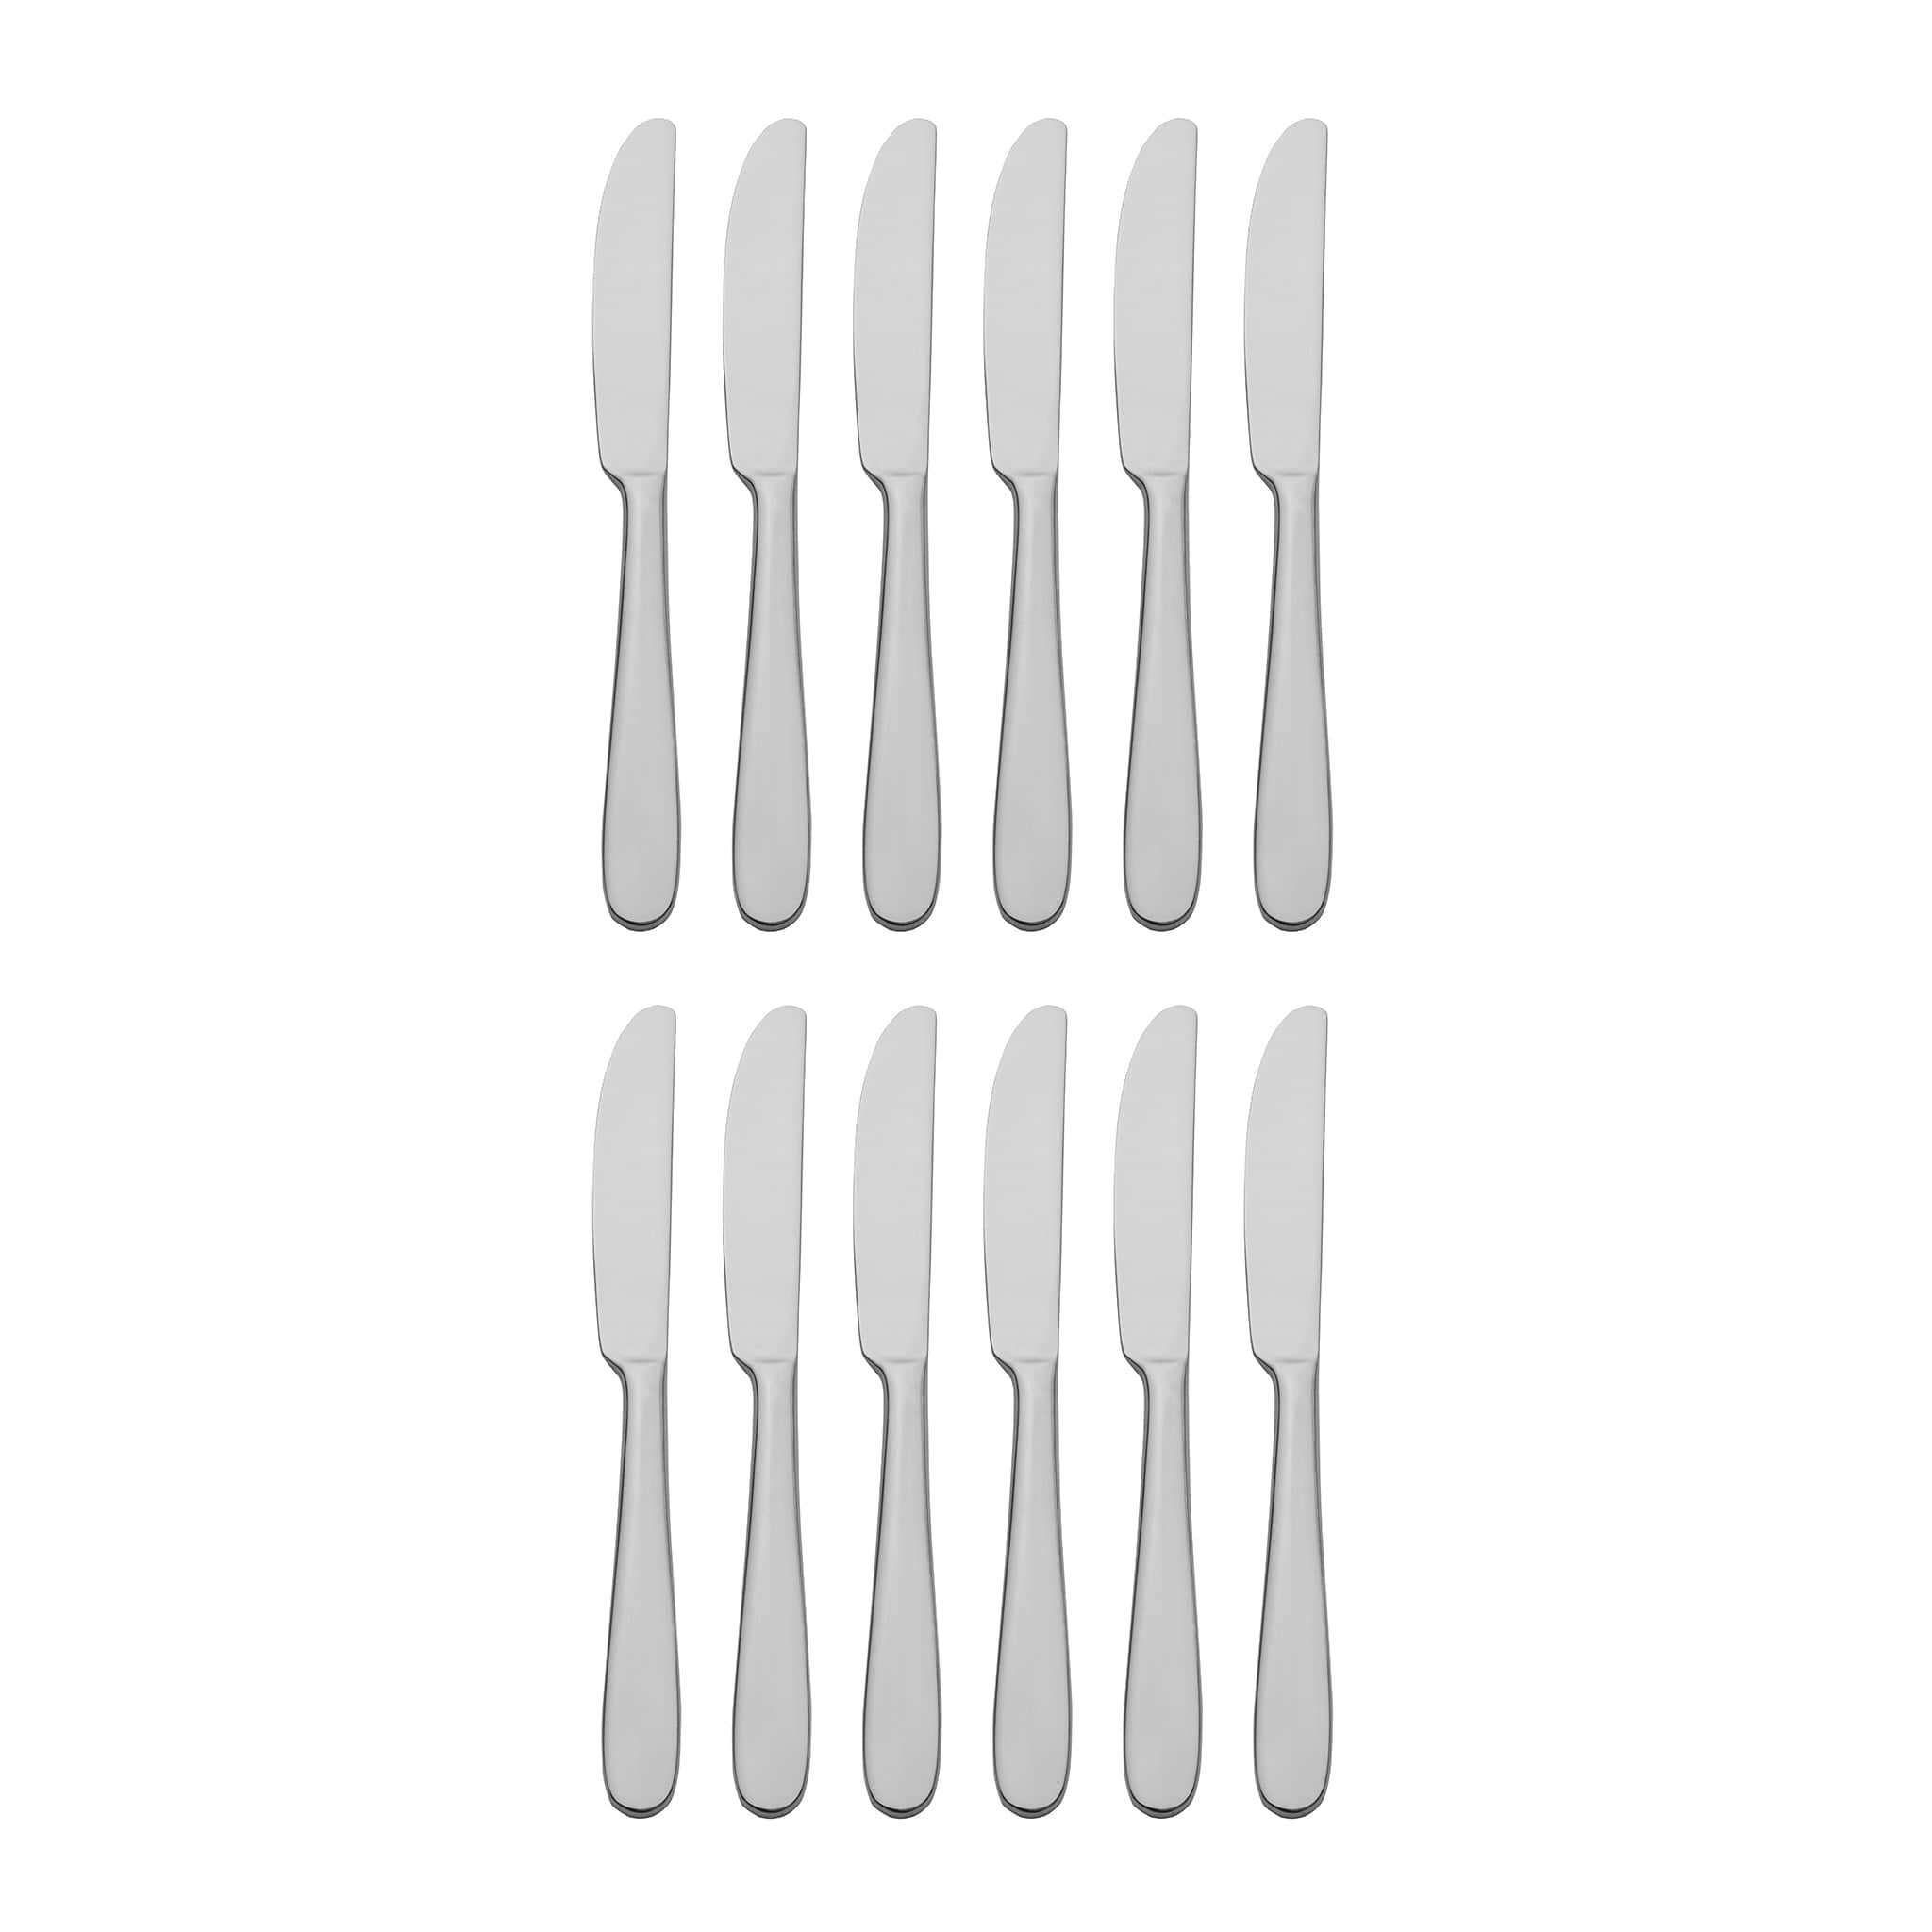 City Limit 18.10 Butter Knife 7.4" Stainless Steel